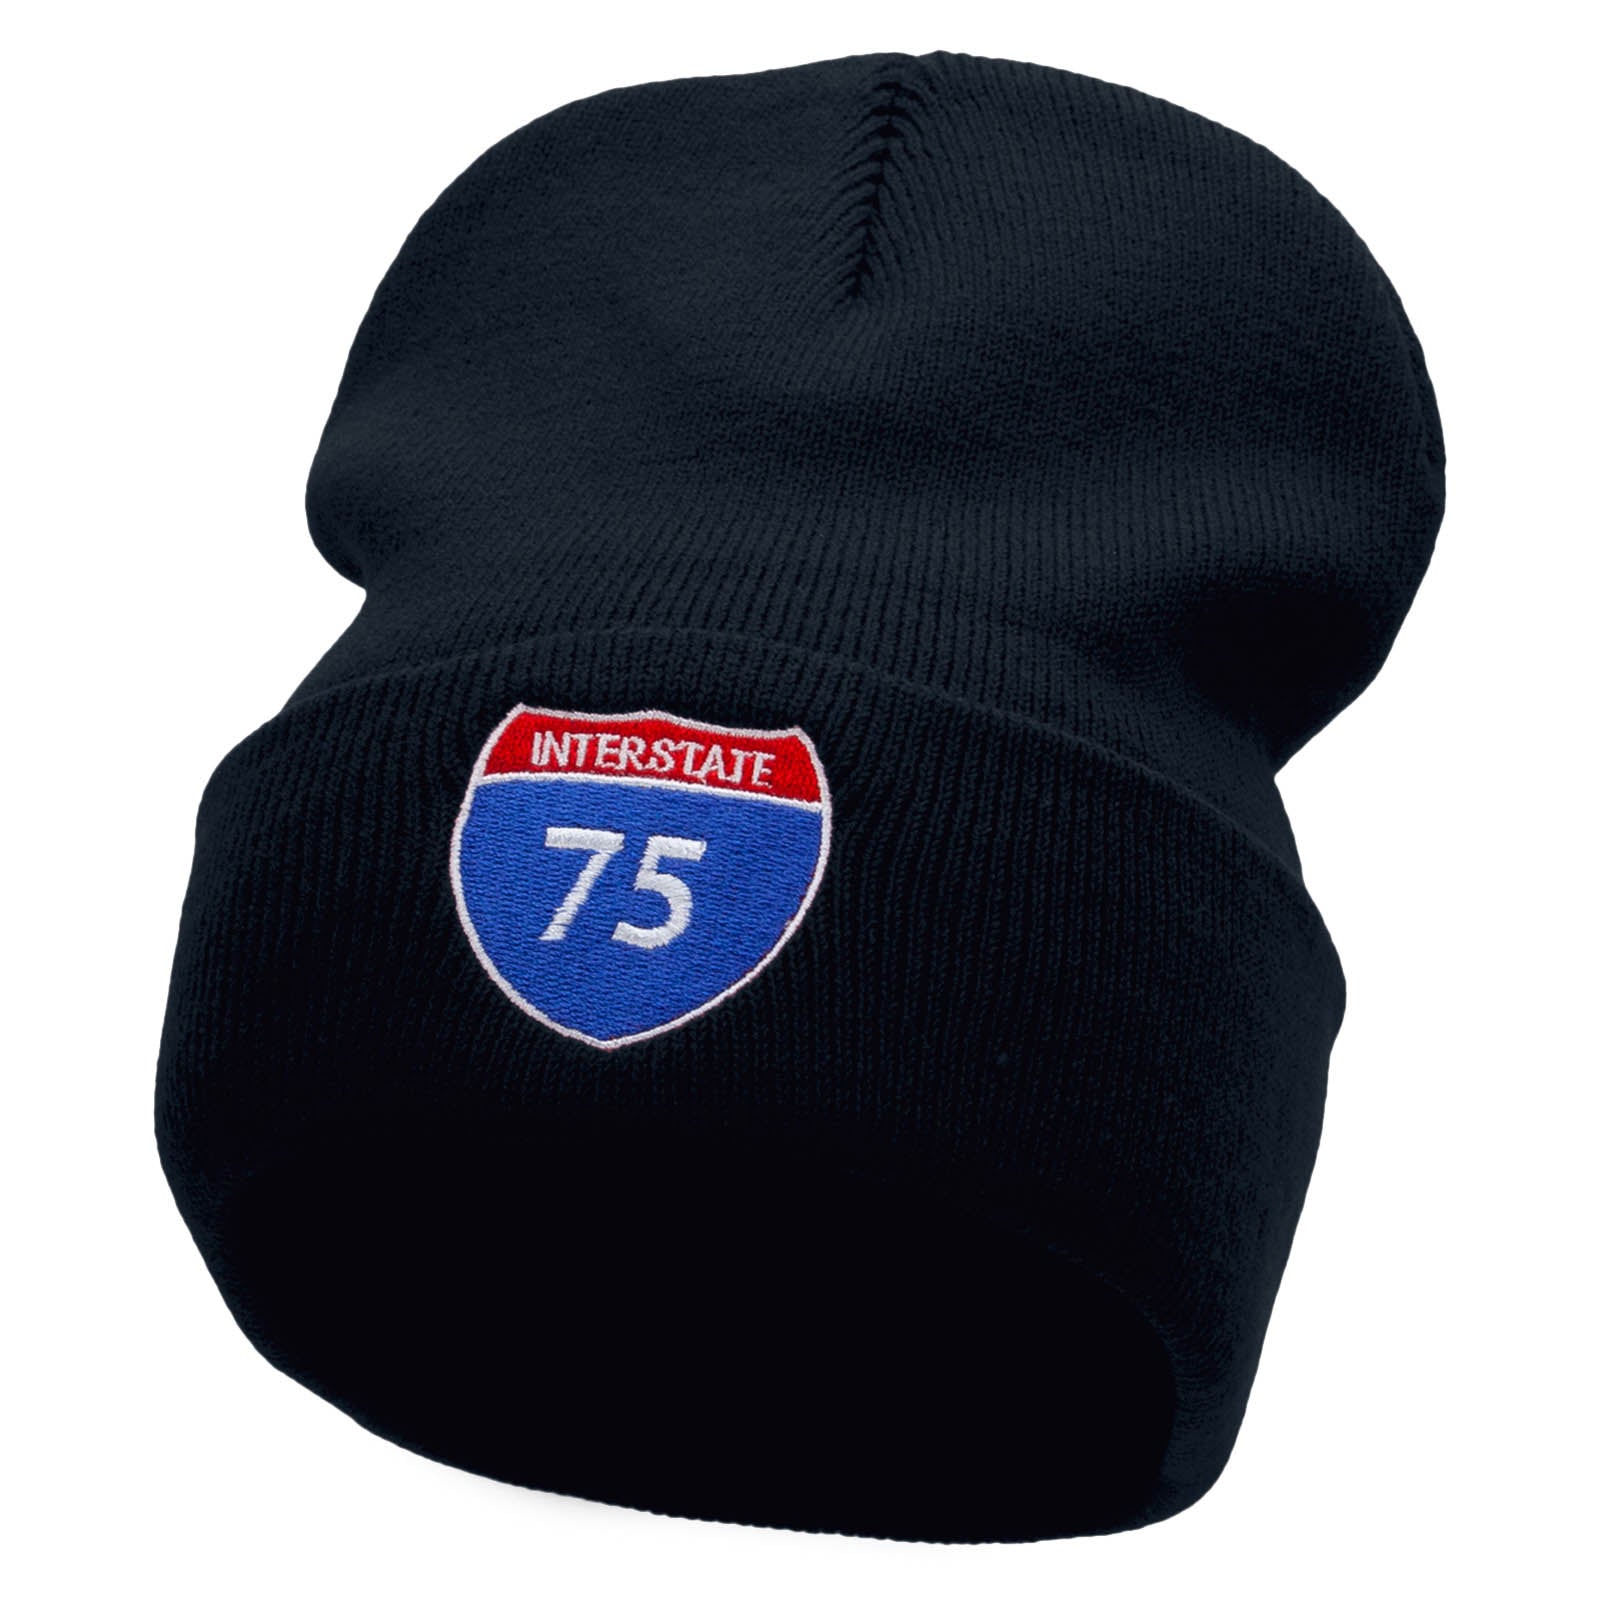 Interstate Highway 75 Sign Embroidered 12 Inch Long Knitted Beanie - Navy OSFM